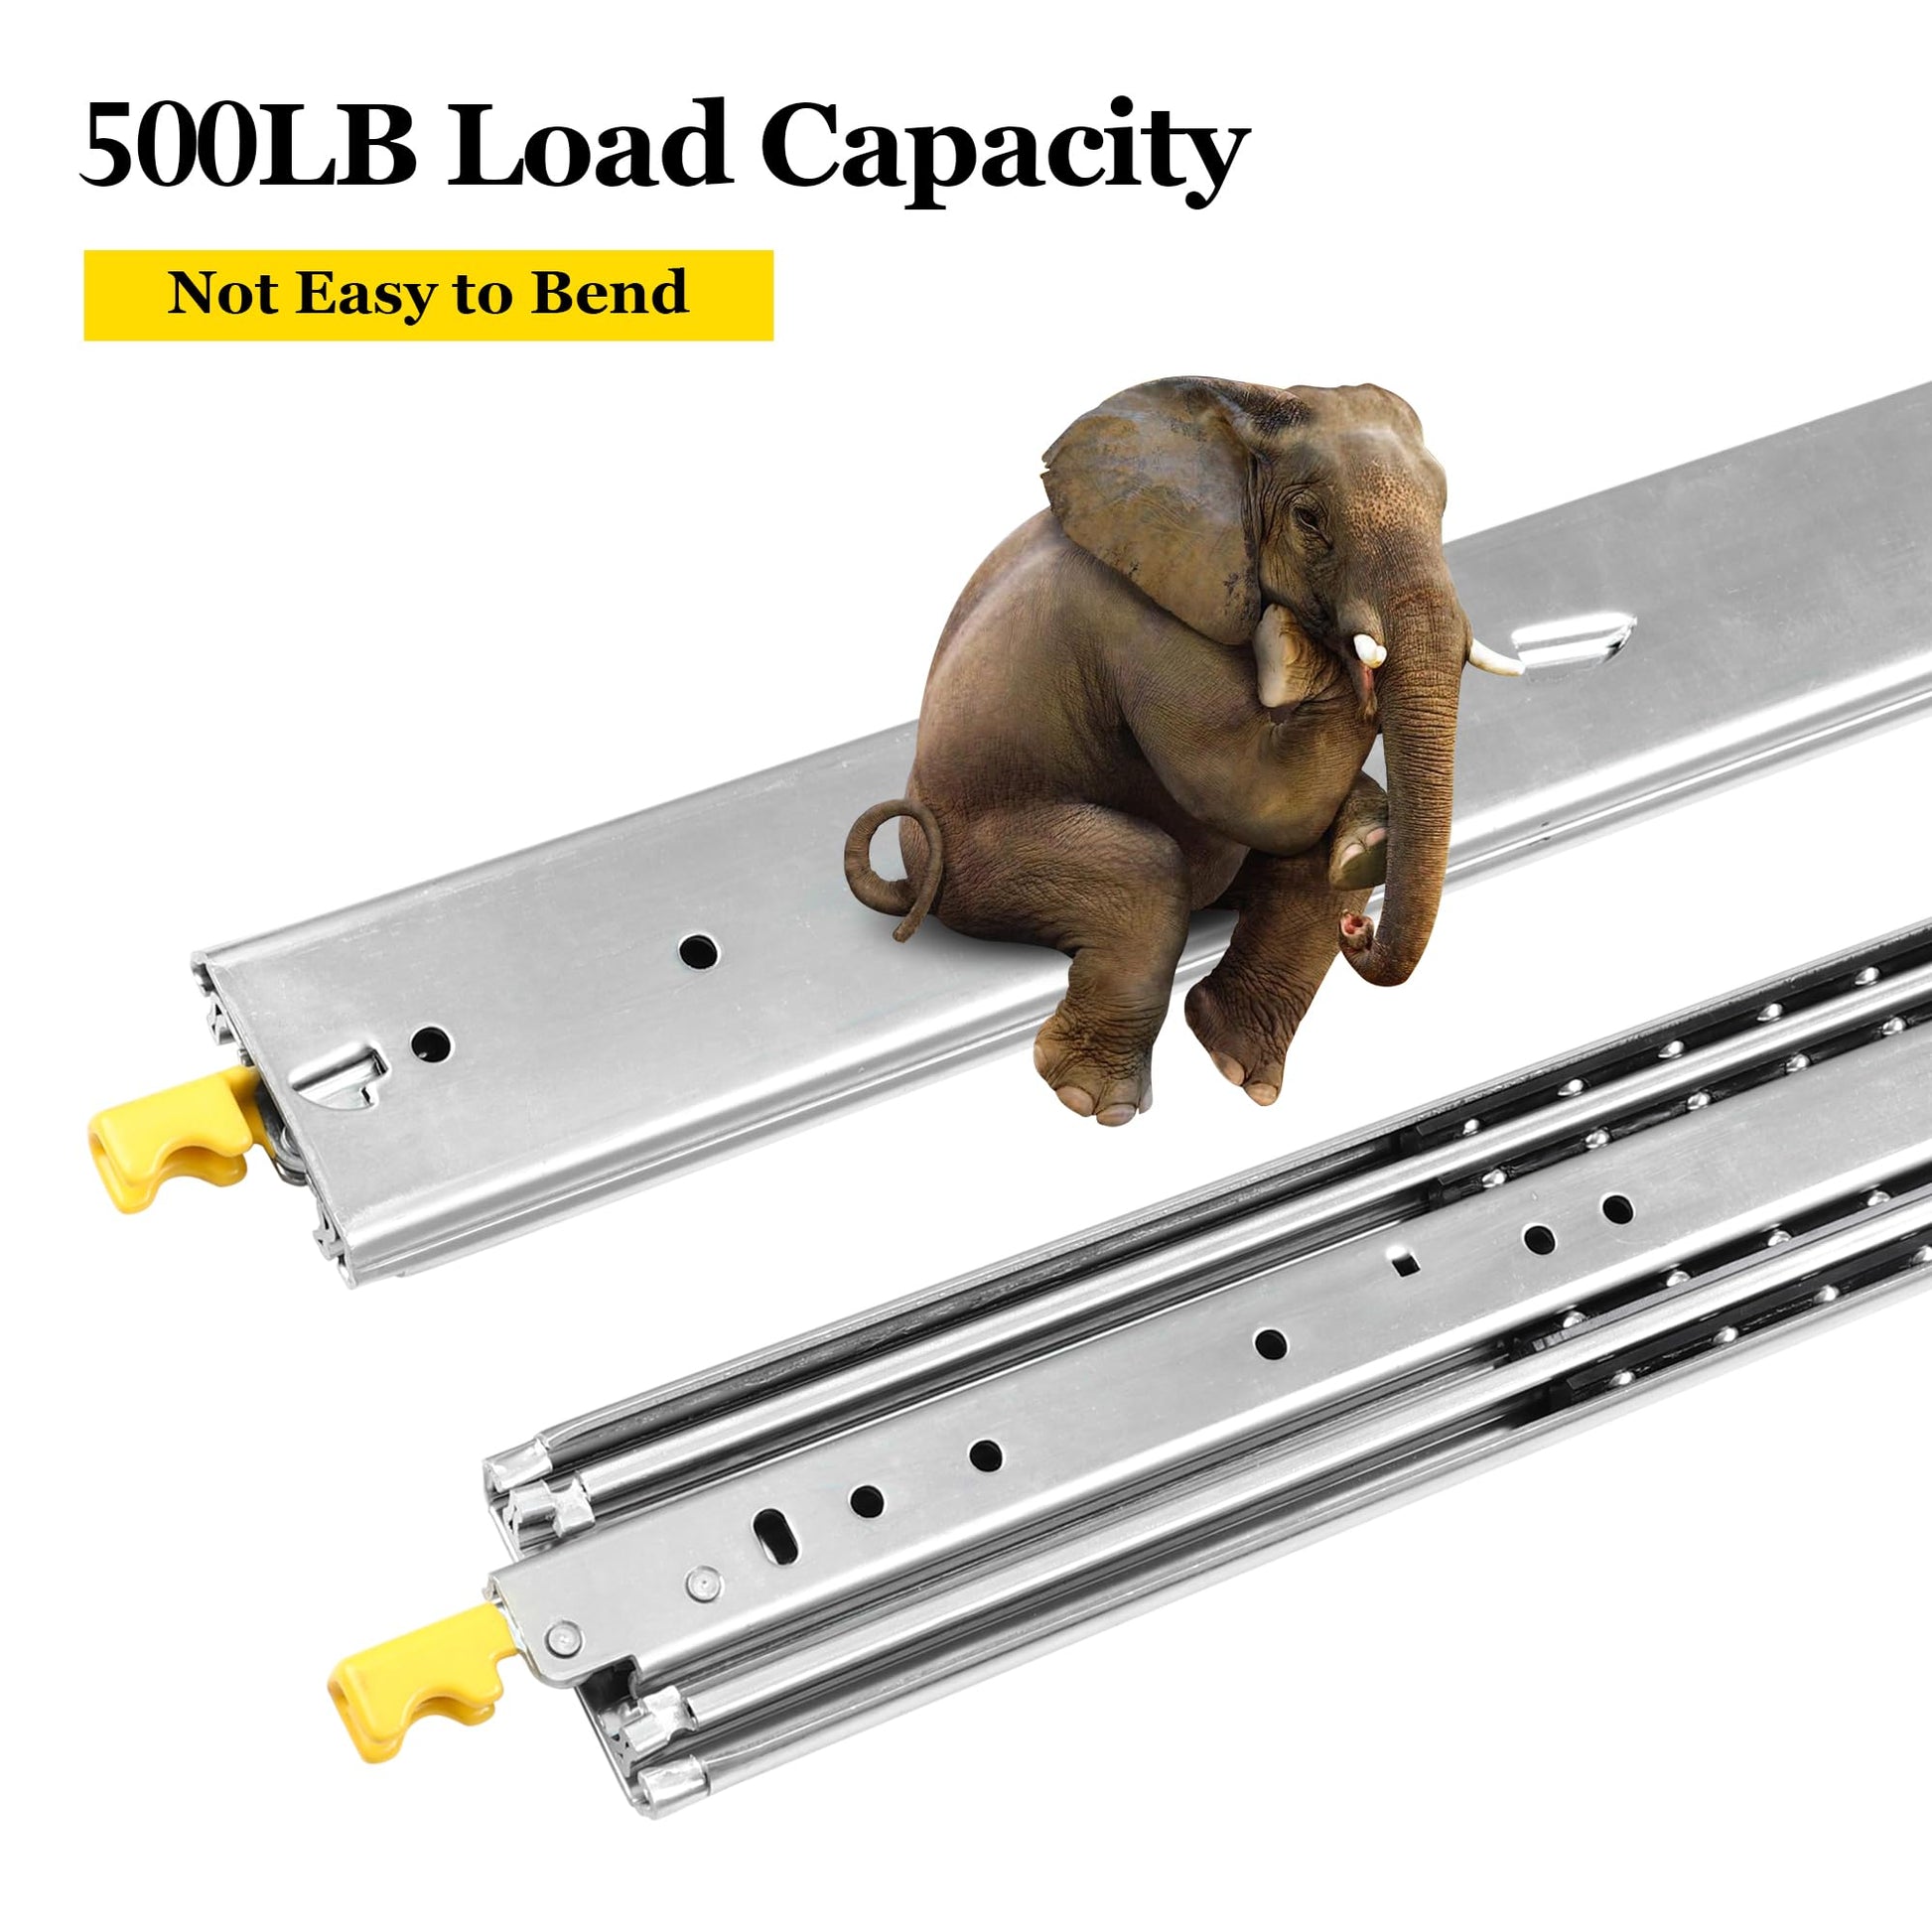 Heavy Duty 500 Lbs Load 3-Fold Slides with Lock - Full Extension - GARVEE